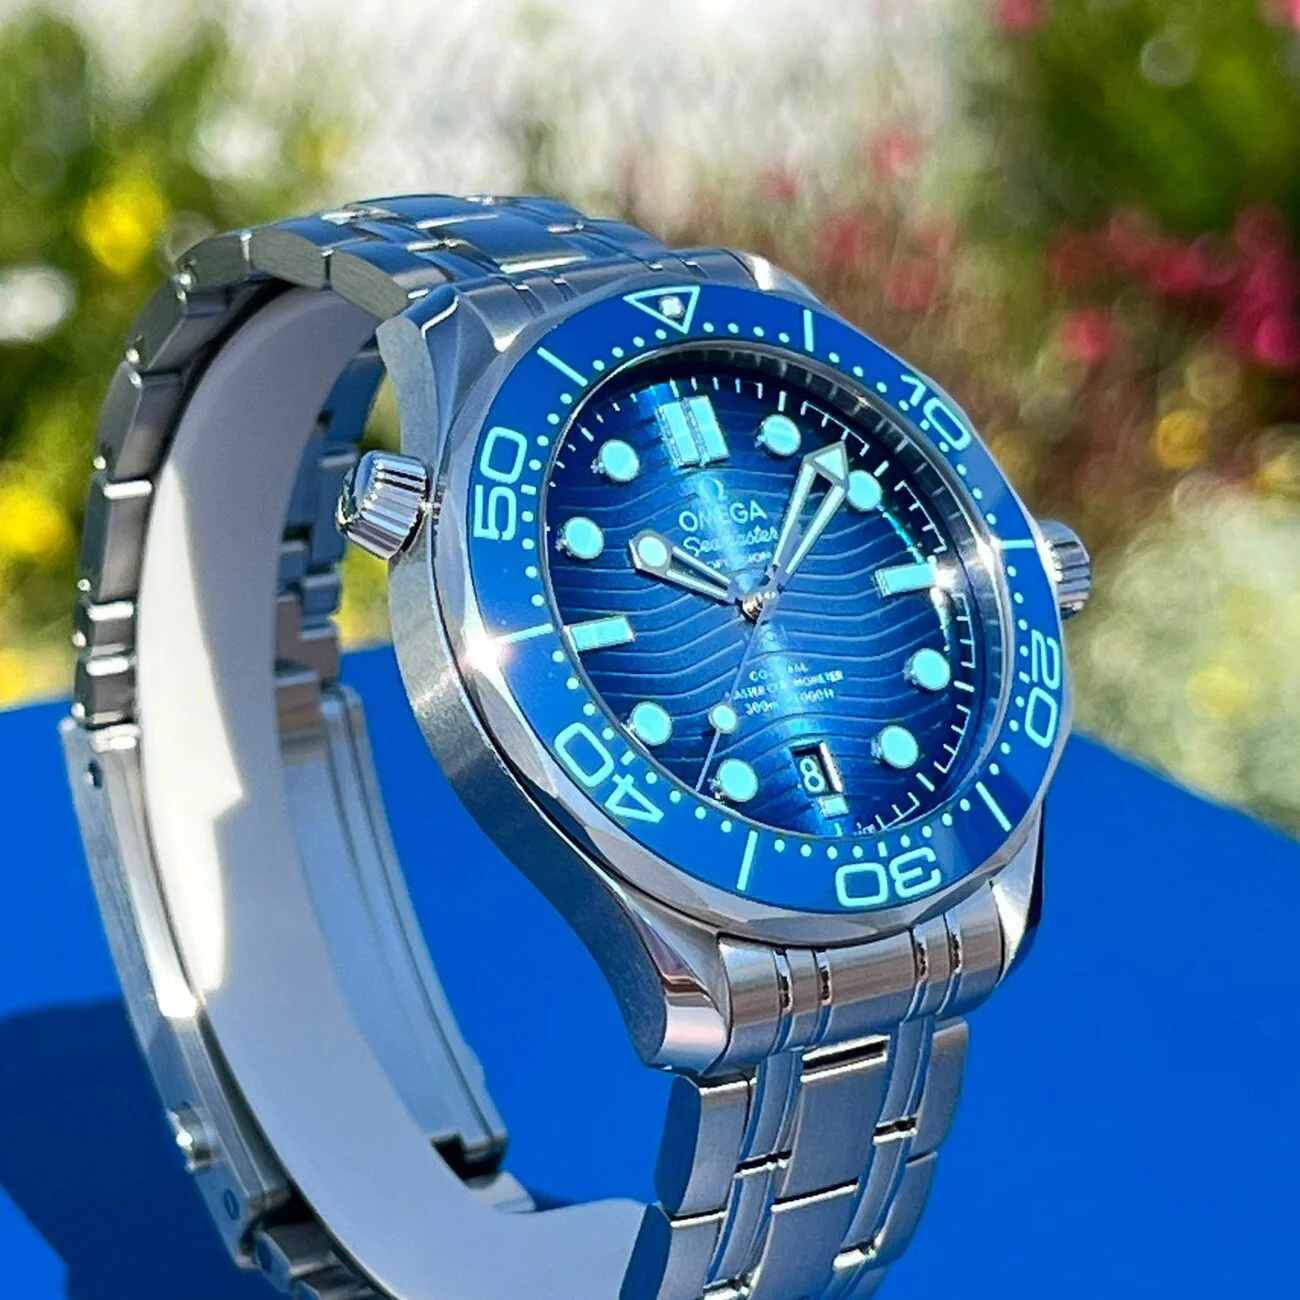 Buy Omega watches | Certified Authenticity | CHRONEXT-hkpdtq2012.edu.vn